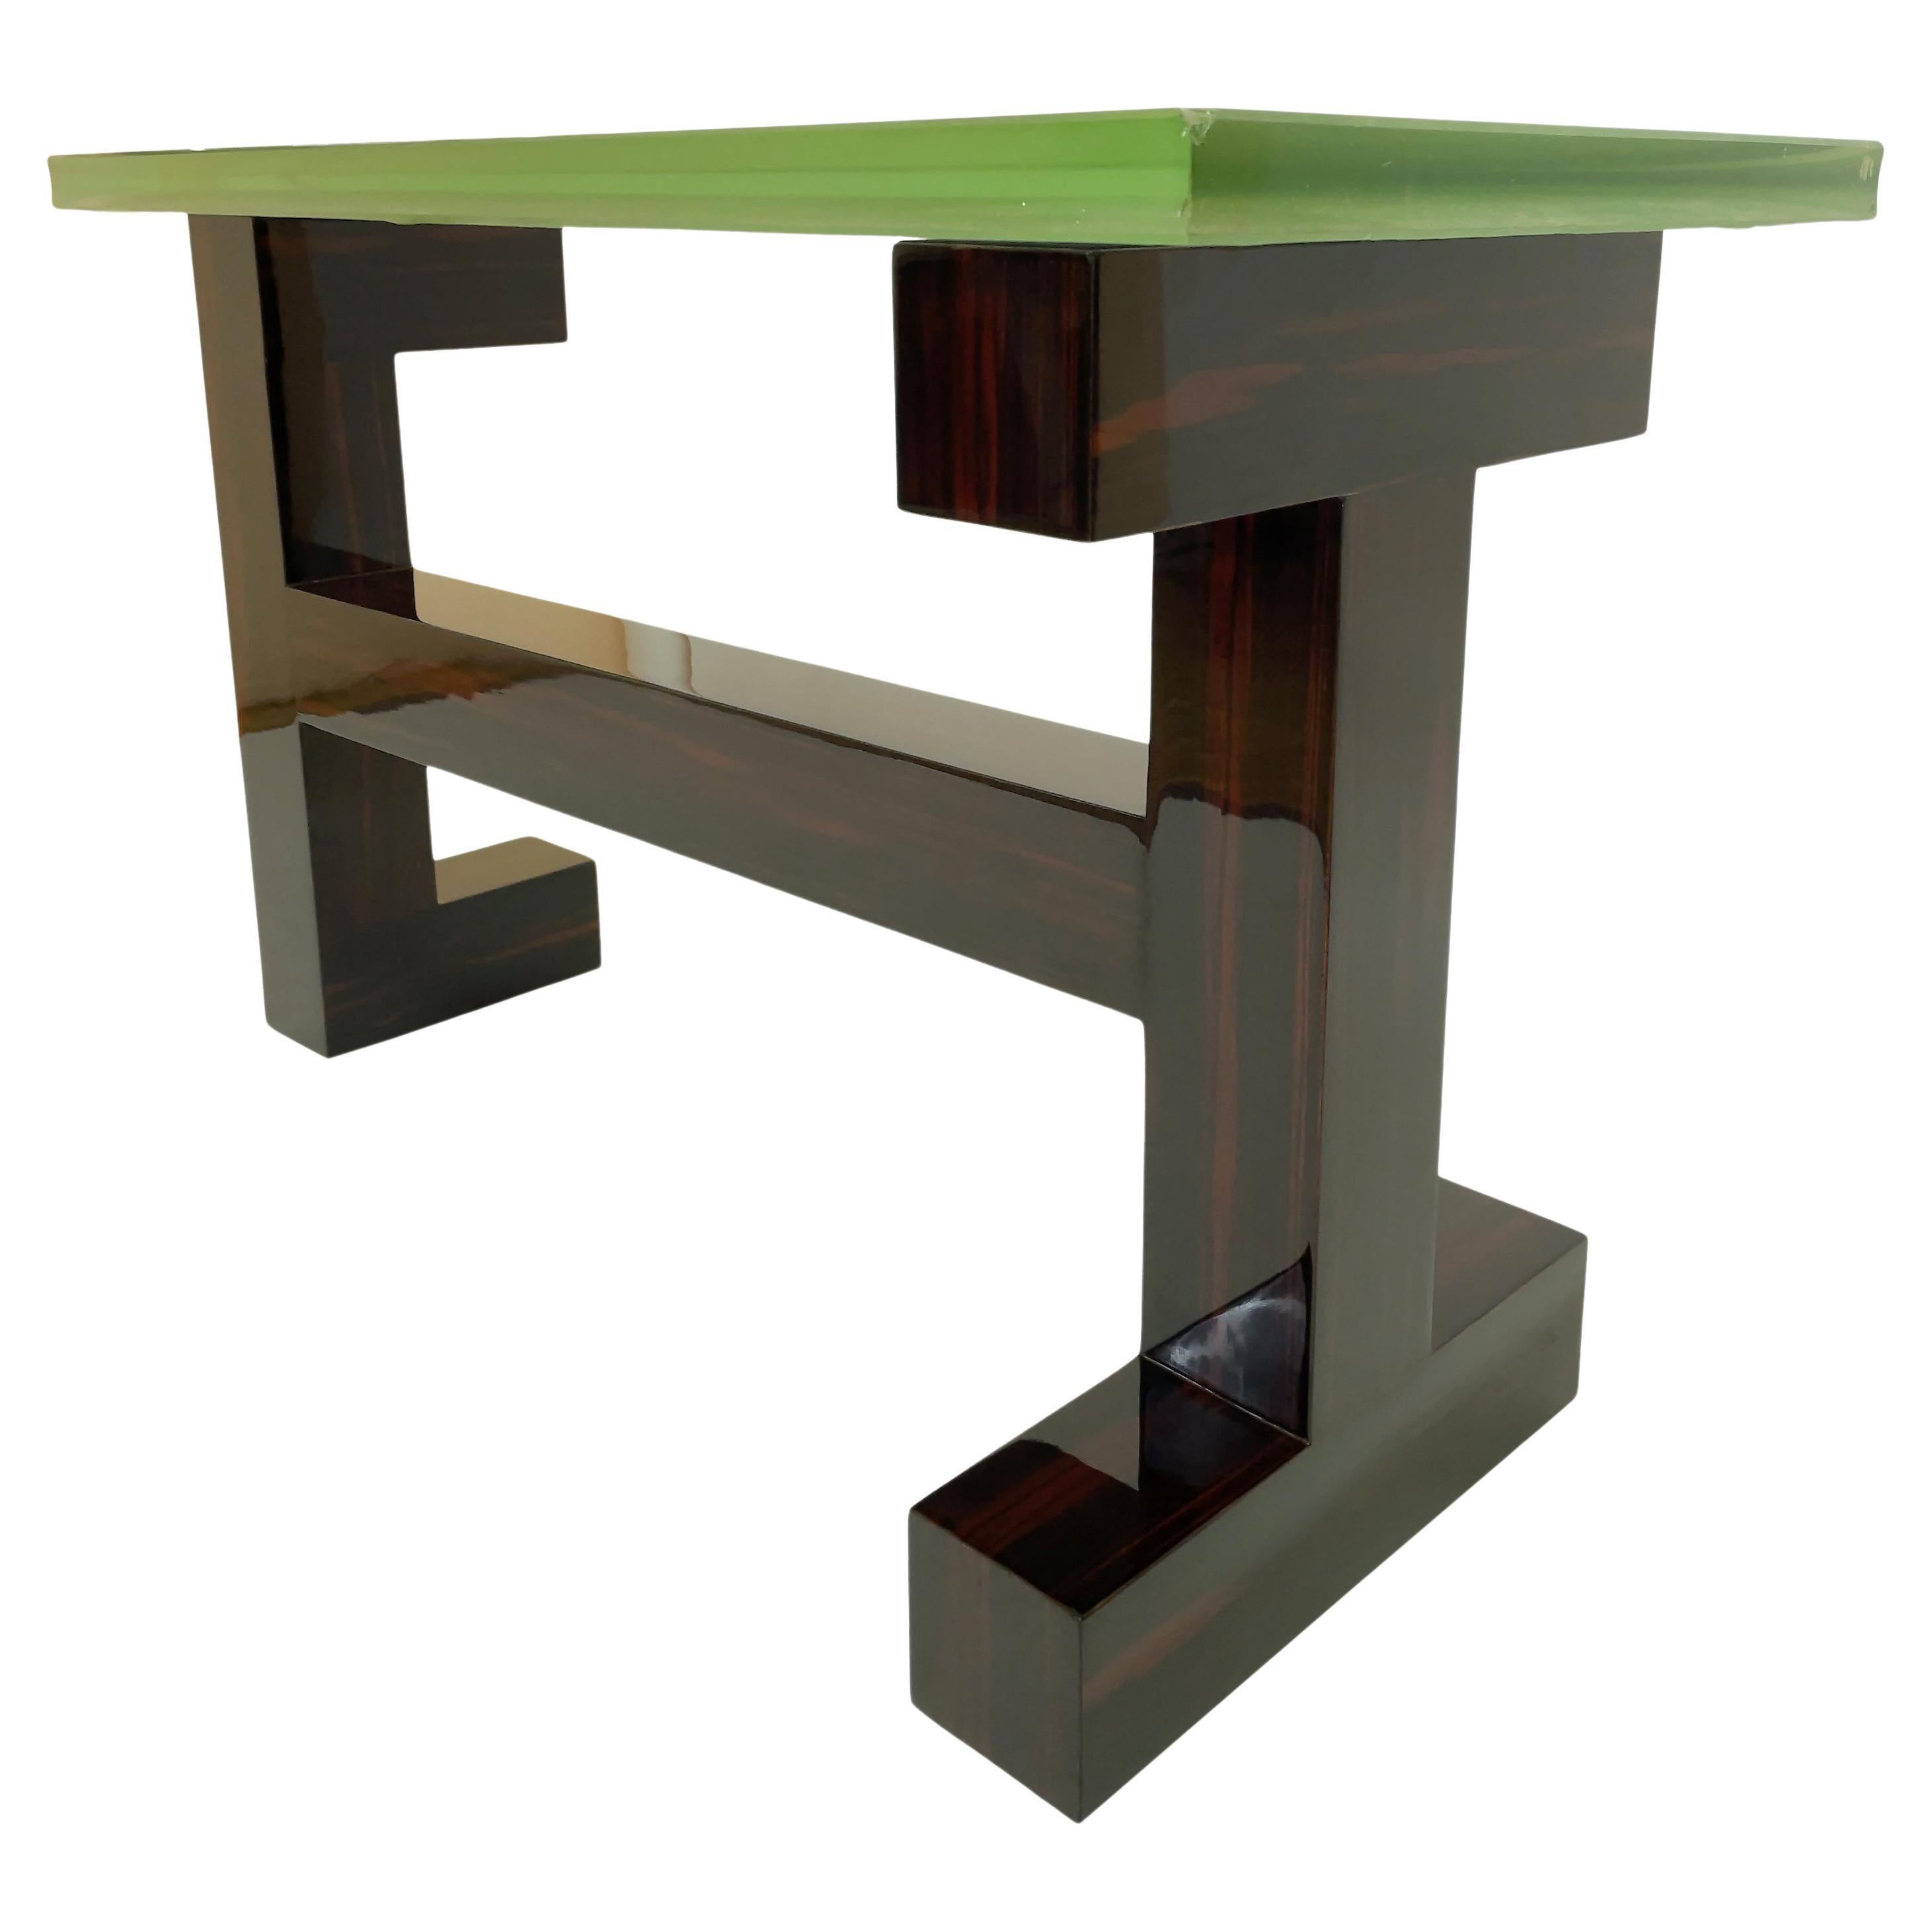 1930's Modernist Art Deco Console Table in Macassar Wood and Thick Glass Top